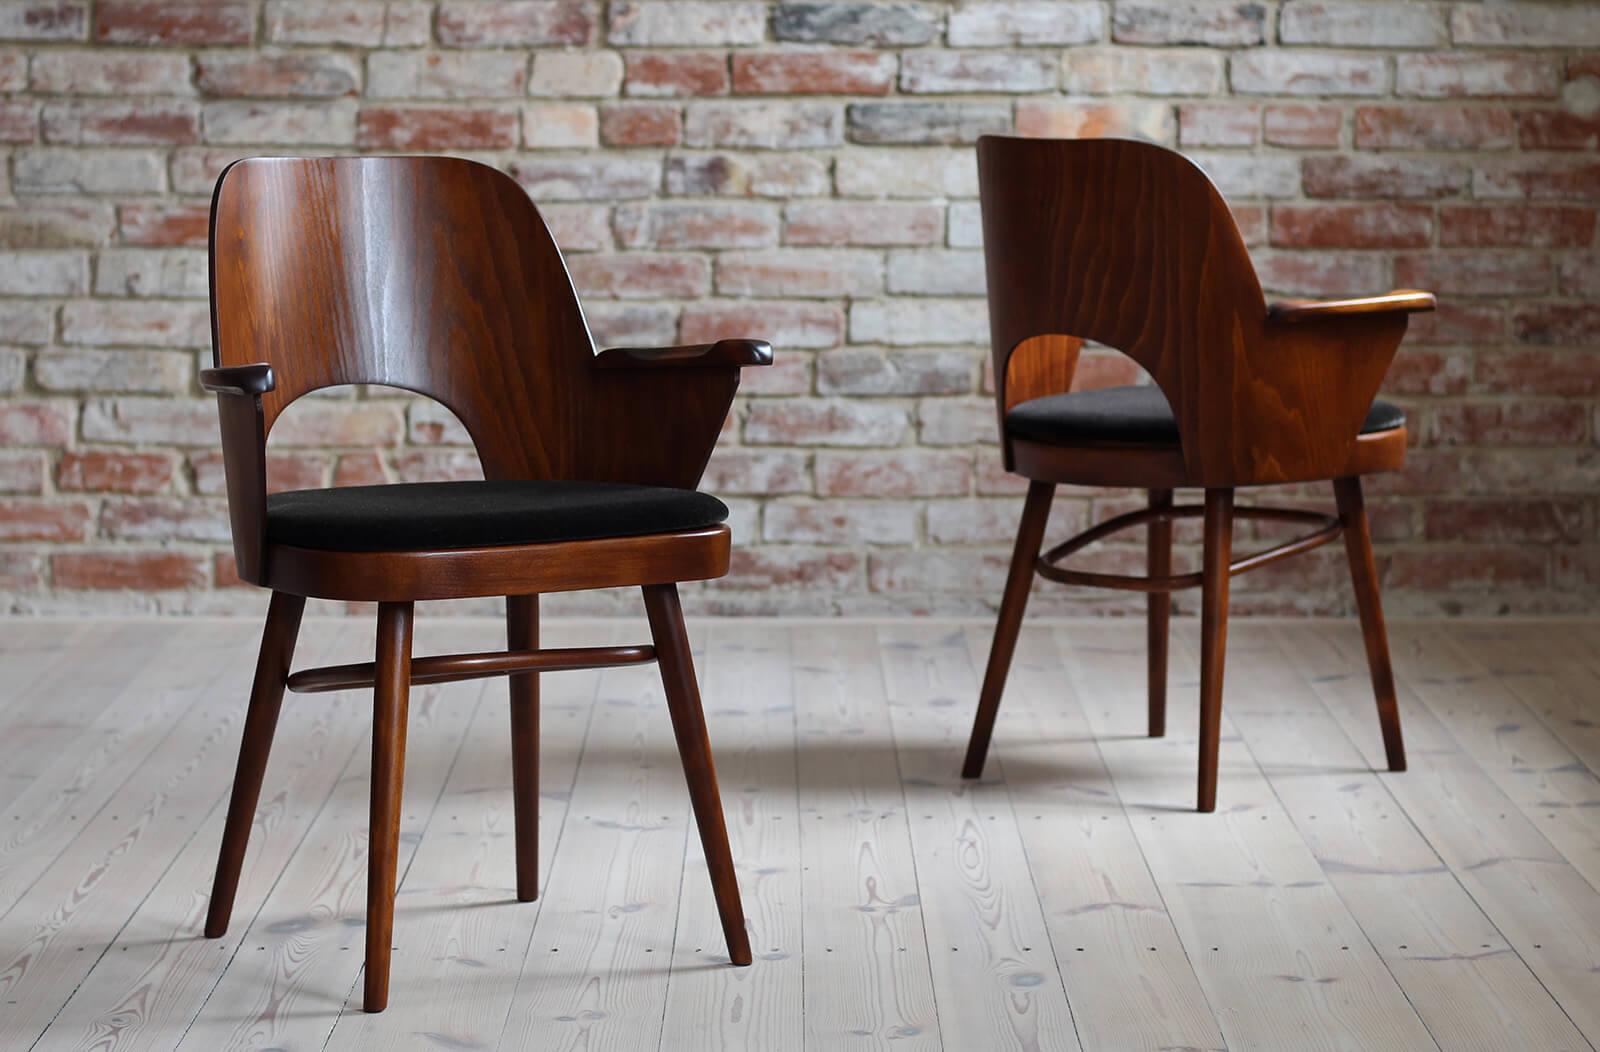 Mid-20th Century Set of 4 Midcentury Dining Chairs by L. Hofmann, Reupholstered in Kvadrat Fabric